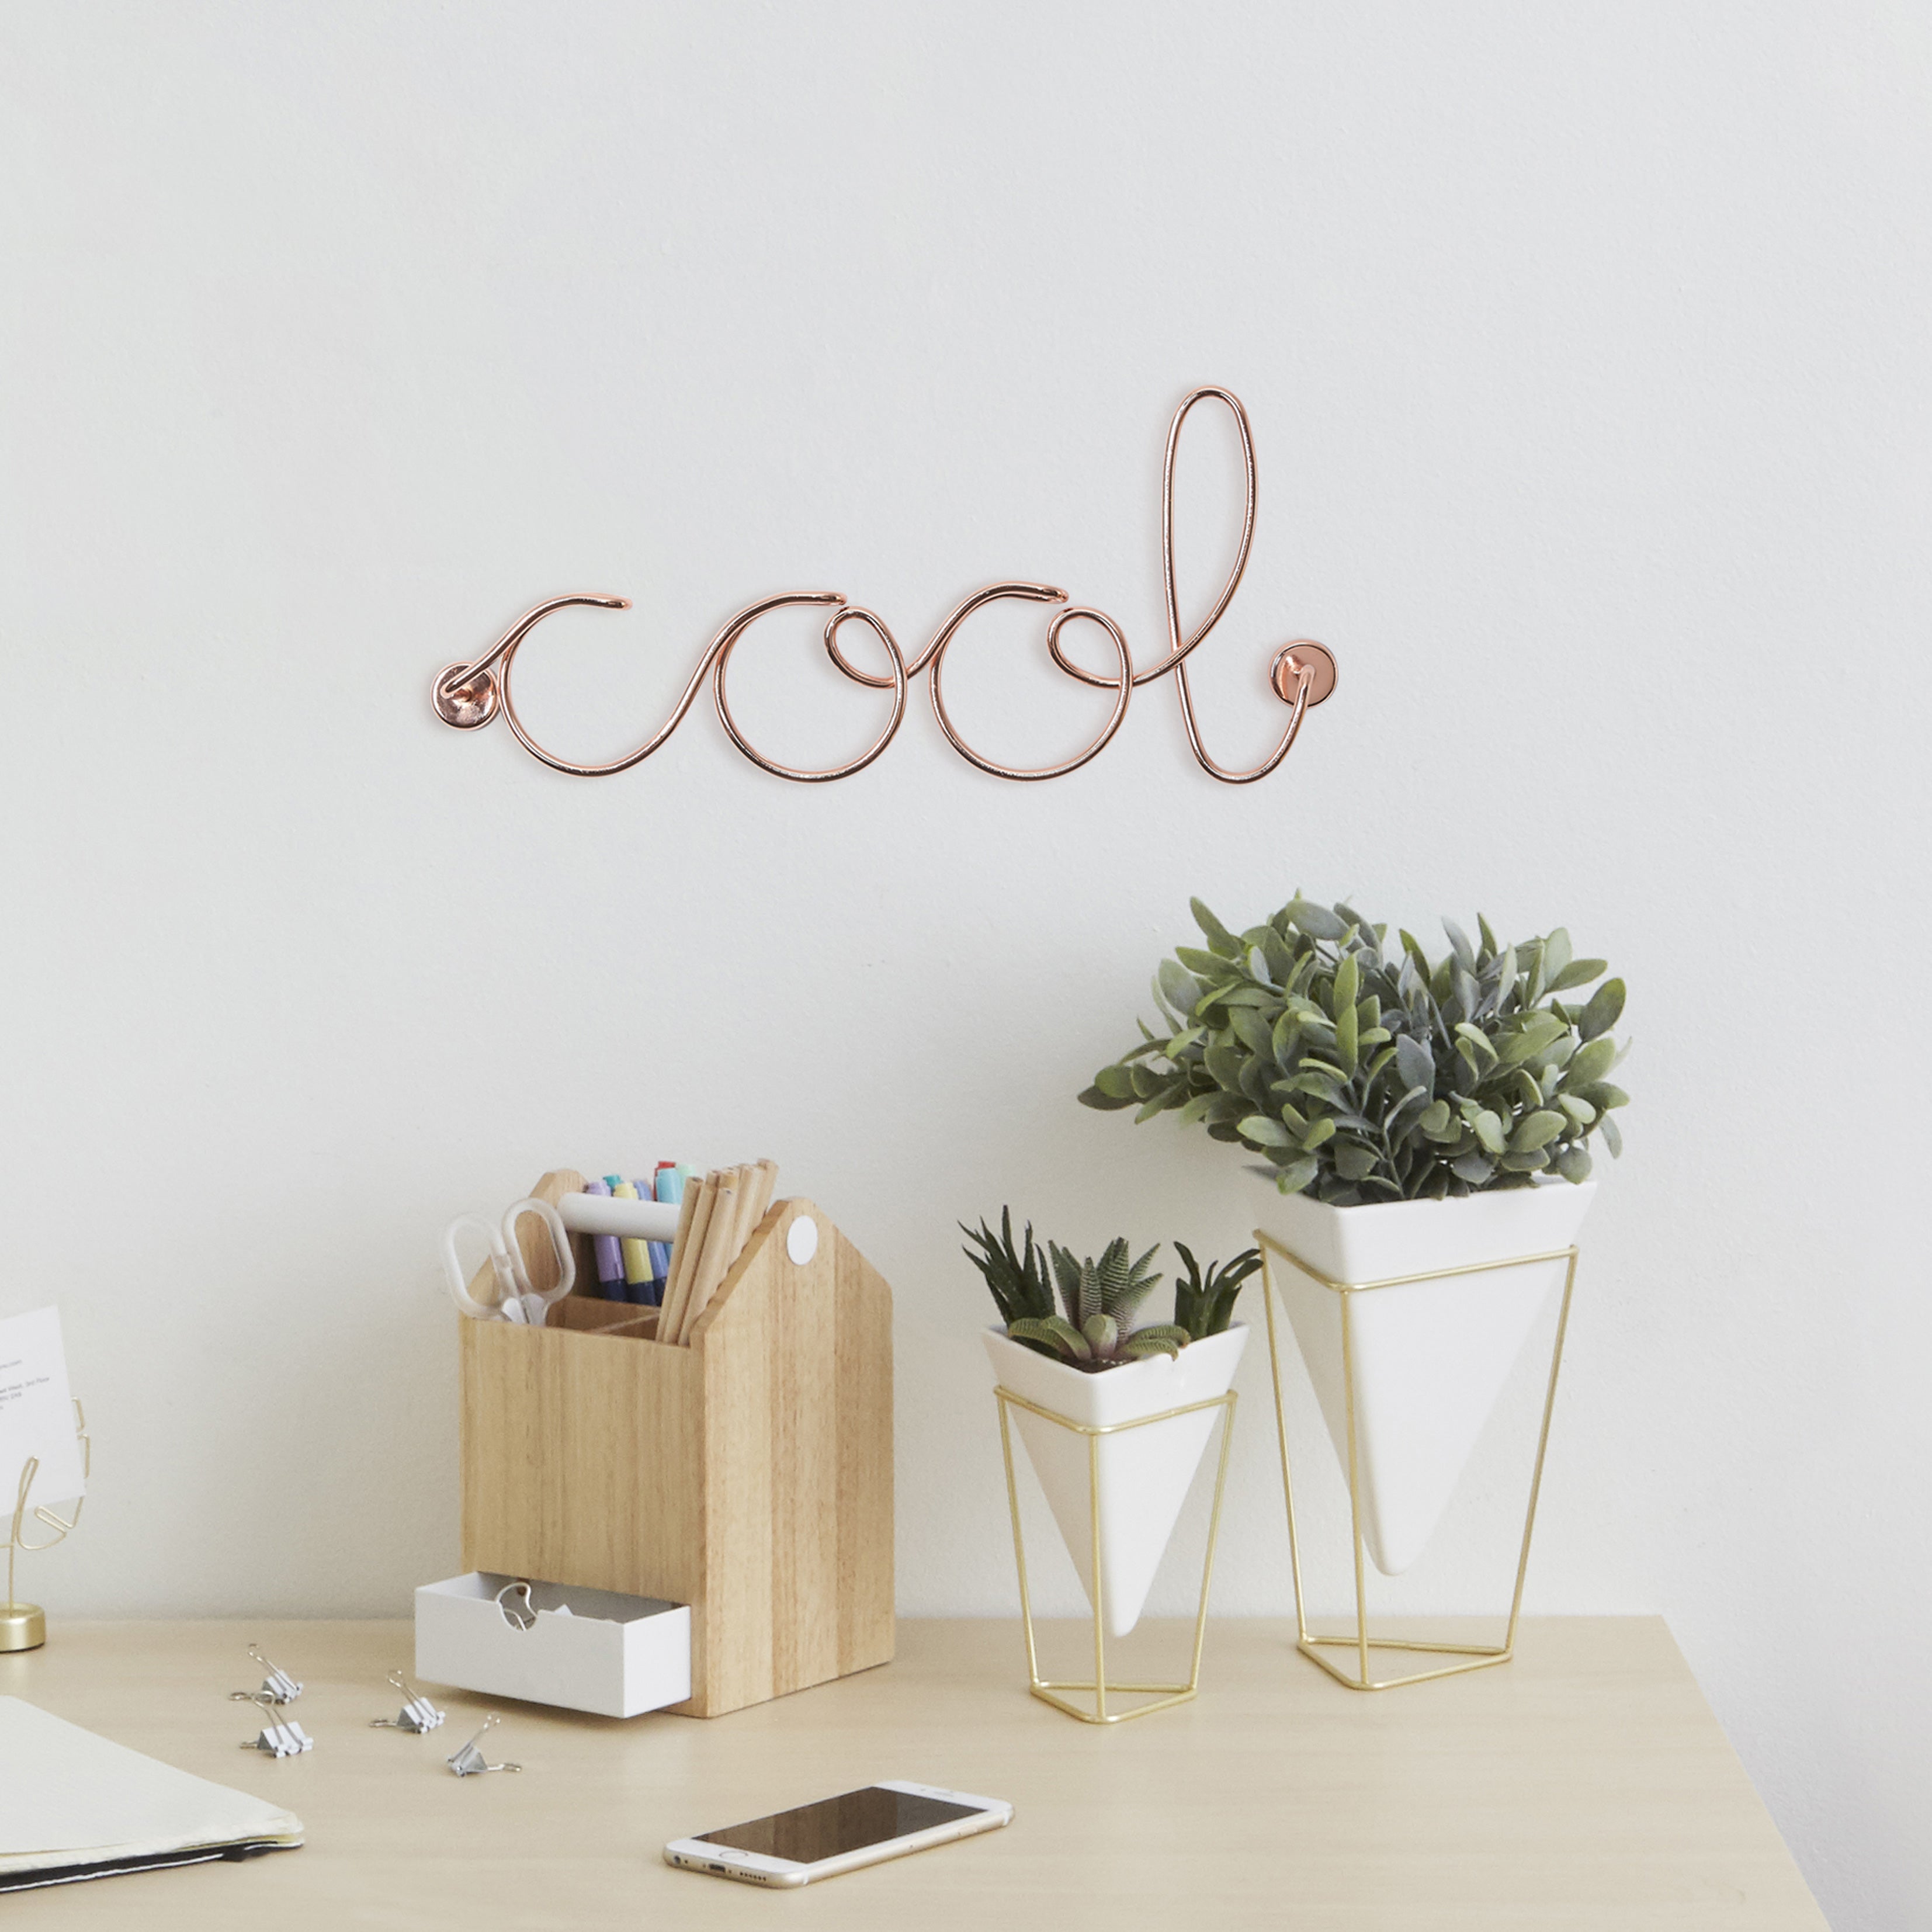 Neon-Light Inspired Cool Wall Sign